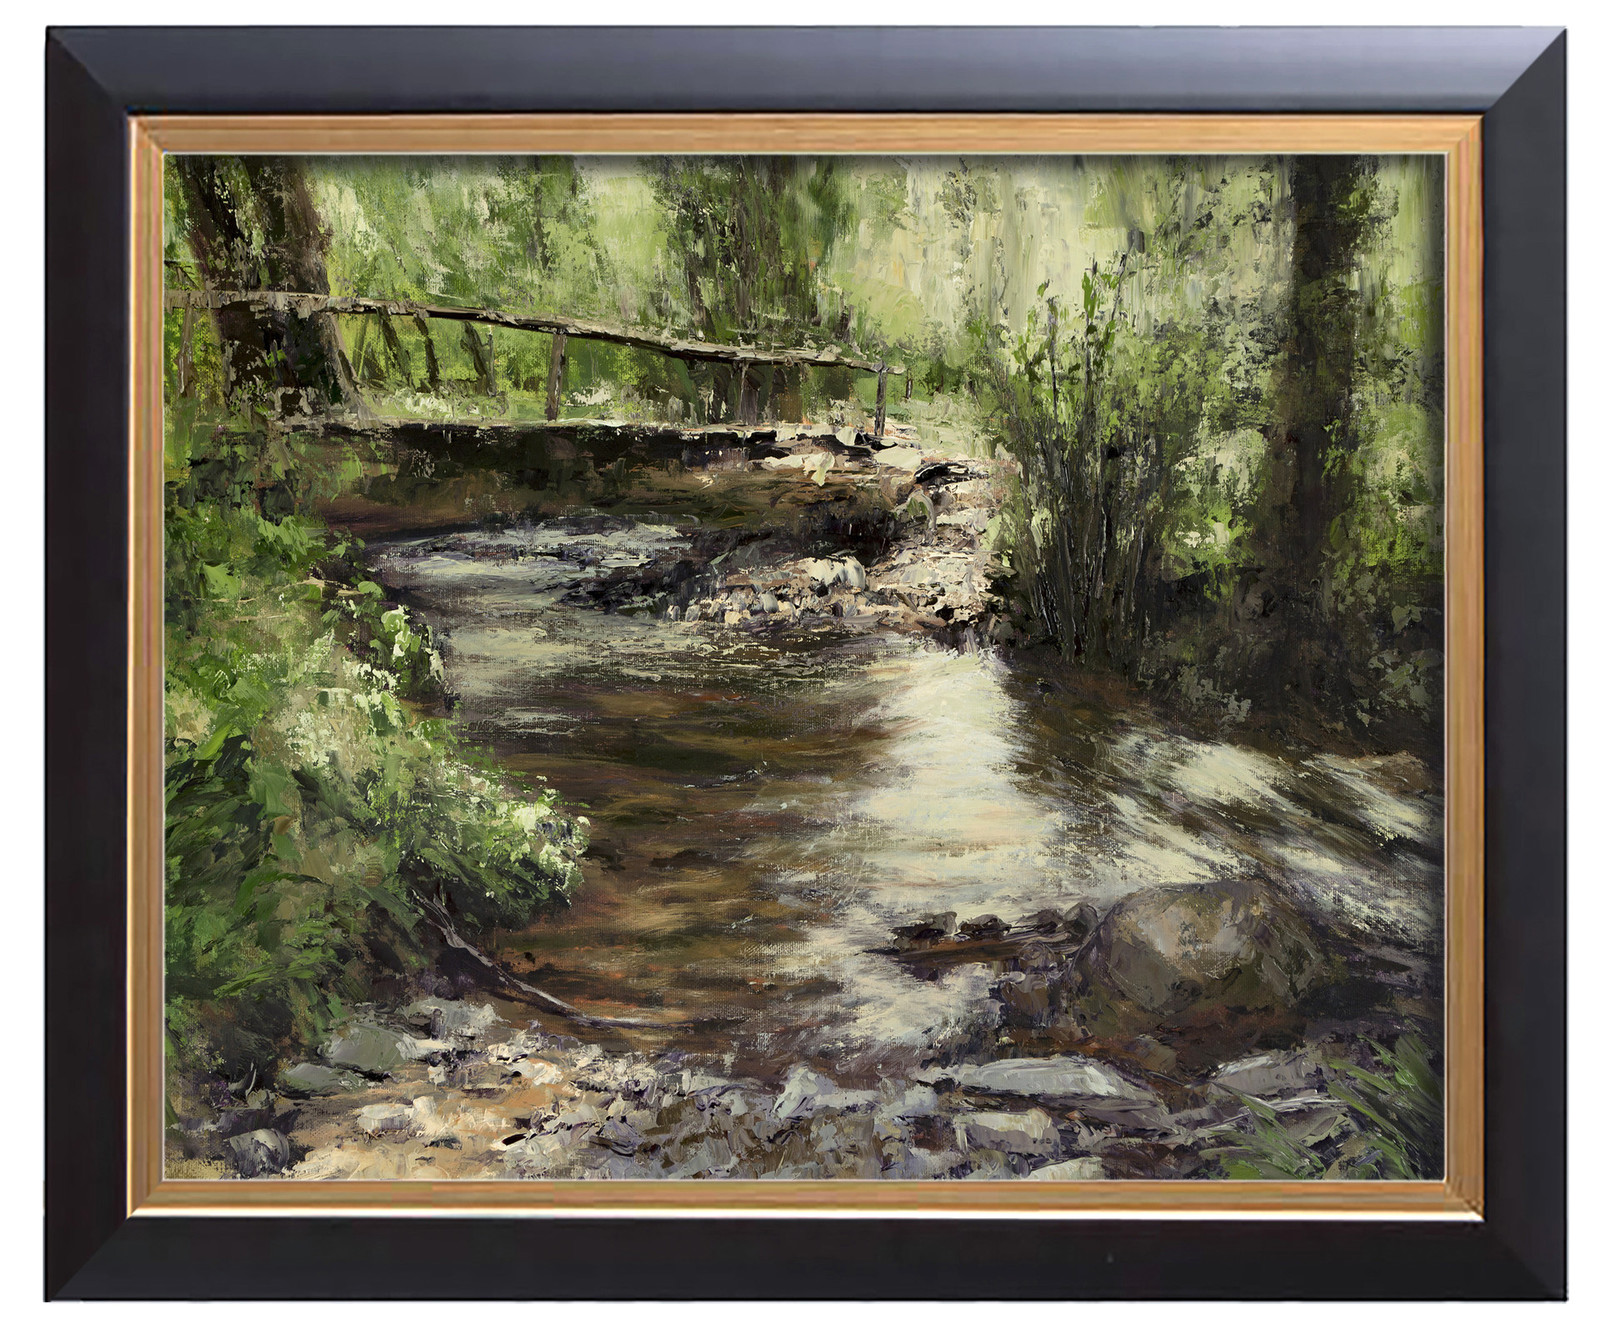 Bridge over brook -for sale 15.7x19This one is for sale for € 540,-. This is with a frame and shipping included. It's painted on canvas on panel, is signed and varnished and is a unique item. It comes with a frame ready to be hanged and comes well packed.